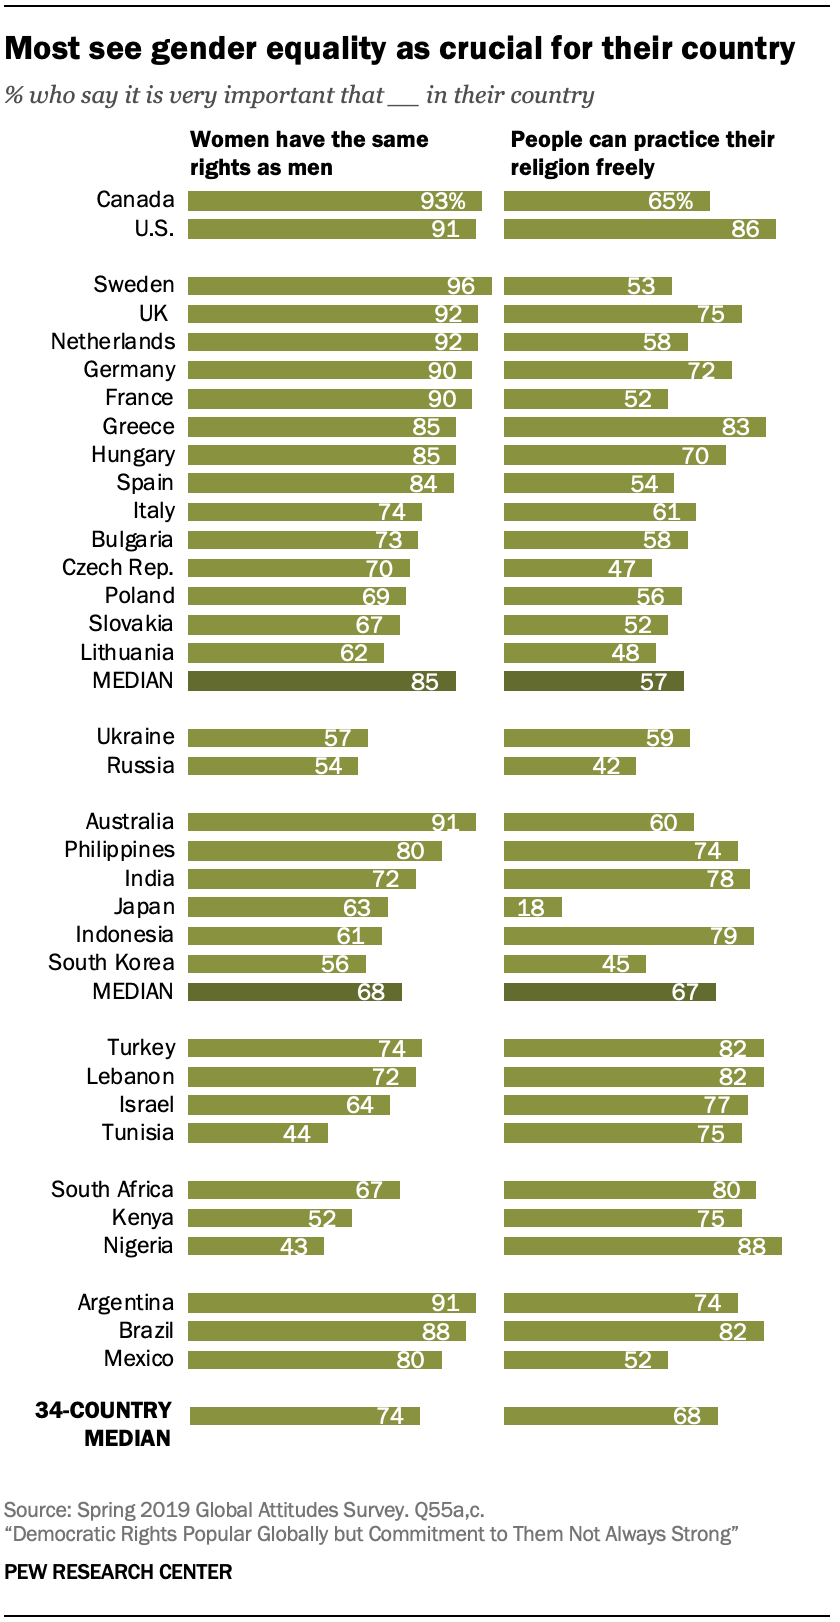 Chart shows most see gender equality as crucial for their country